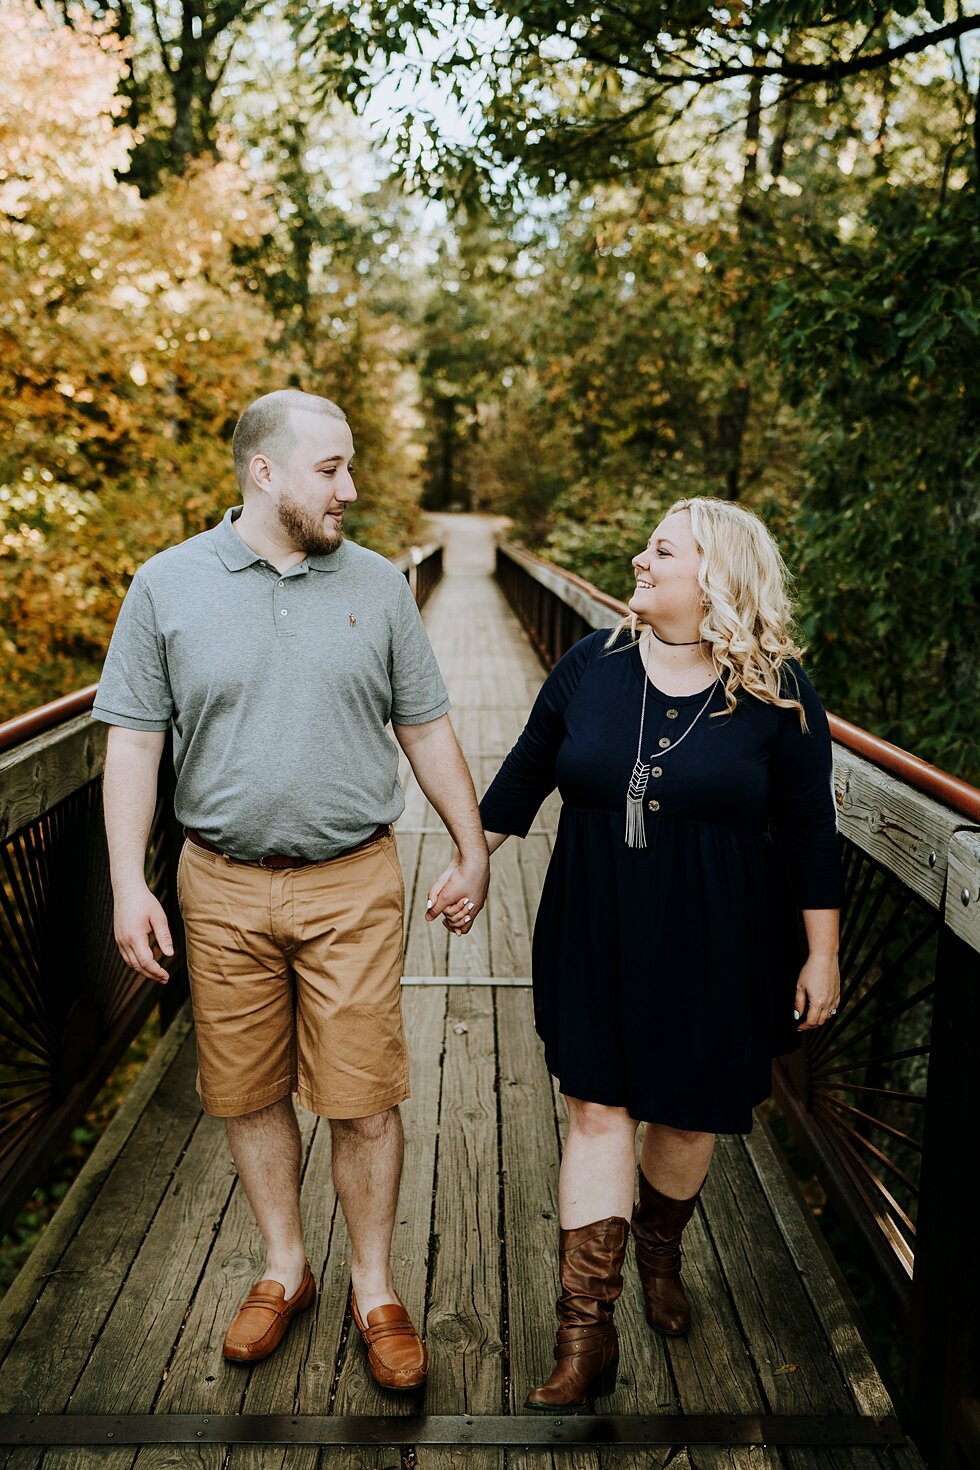  Holding hands on the Bernheim State Forest bridge as an engaged couple #engagementgoals #engagementphotographer #engaged #outdoorengagement #kentuckyphotographer #indianaphotographer #louisvillephotographer #engagementphotos #savethedatephotos #save